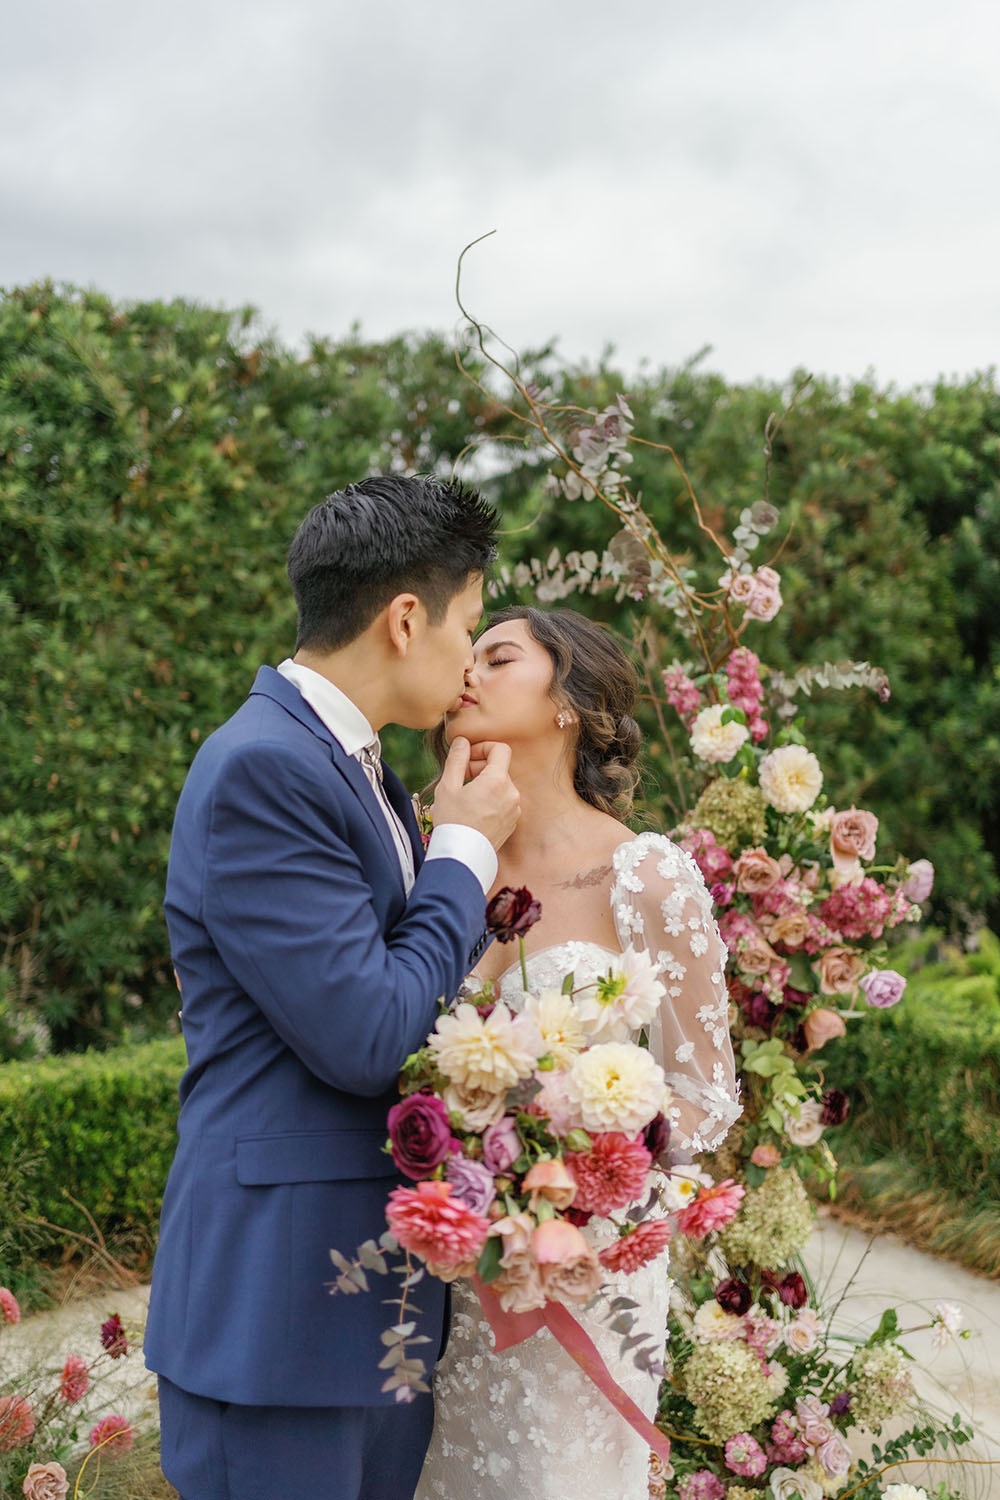 Stunning Colorful Outdoor Garden Inspired Wedding At Mcgovern Ce